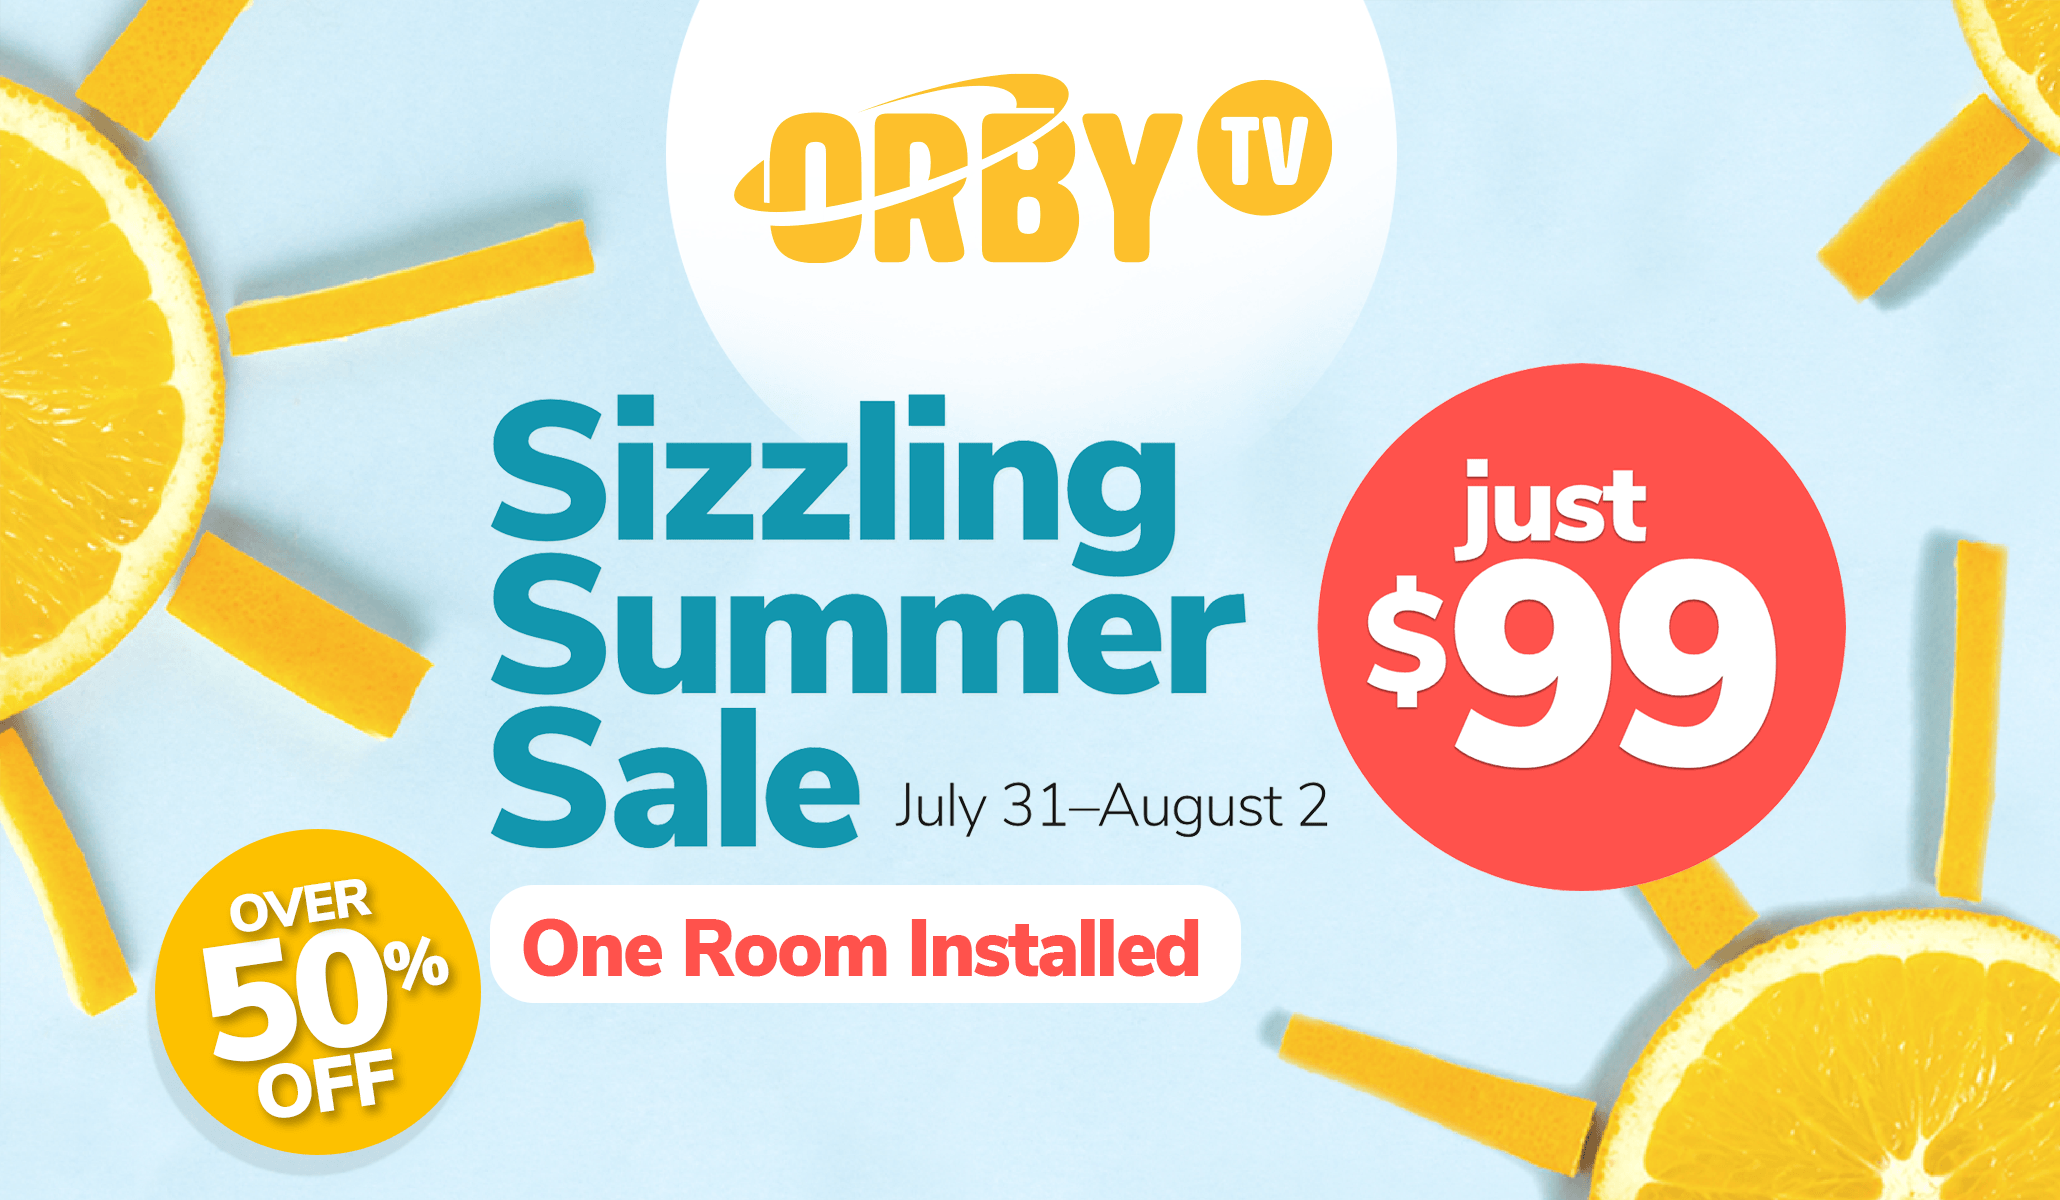 Orby TV is Offering a Summer Sale for New Customers